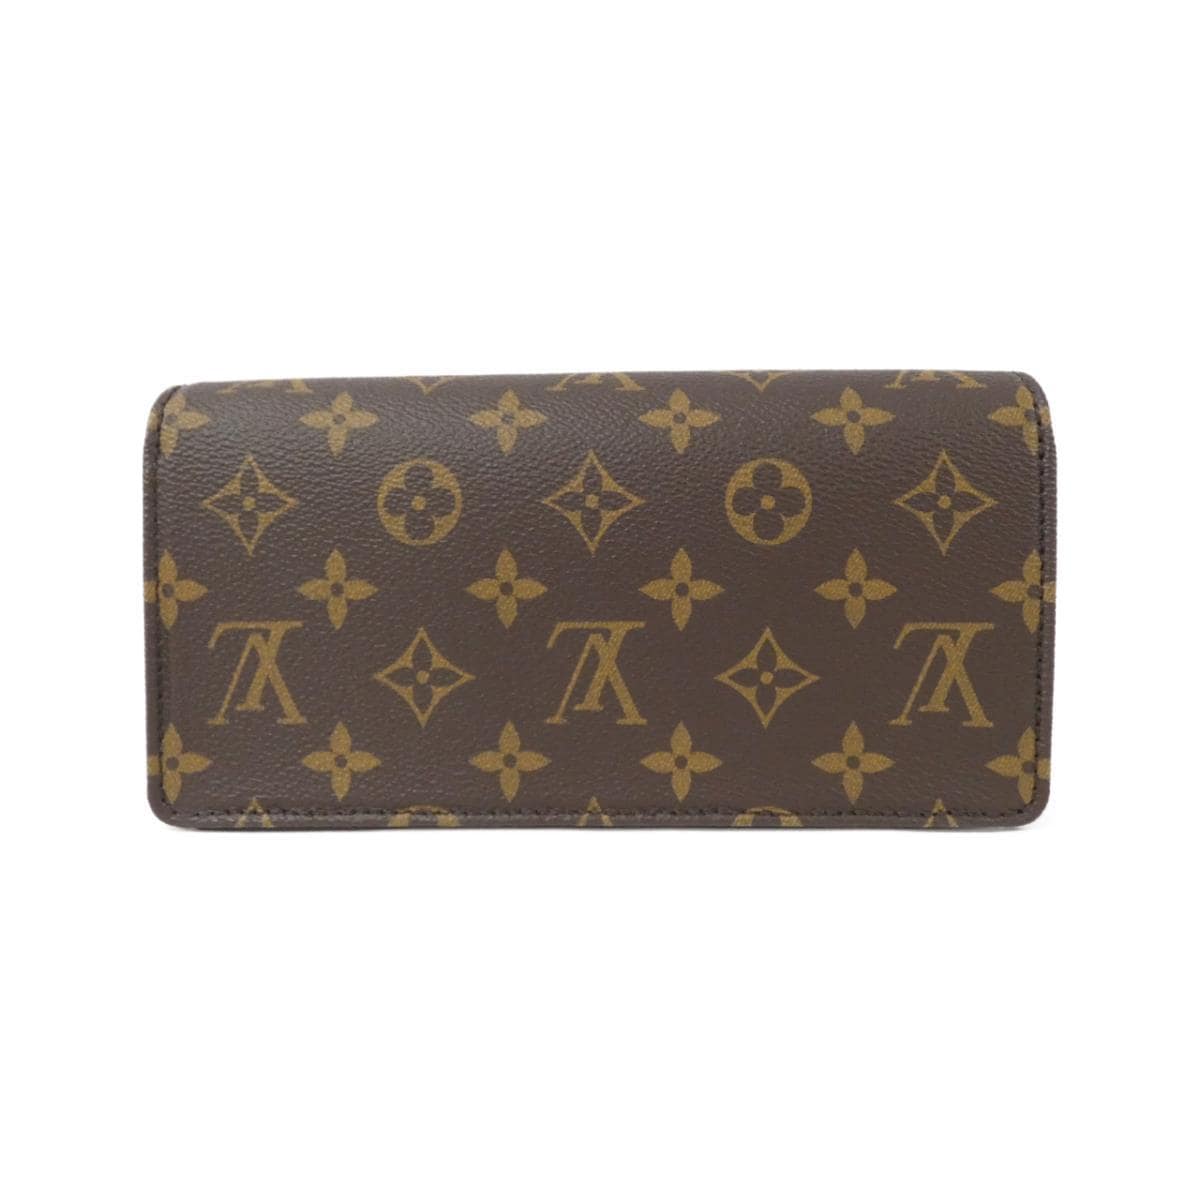 [Unused items] LOUIS VUITTON Monogram Wallet on Chain Lily M82509 Bag